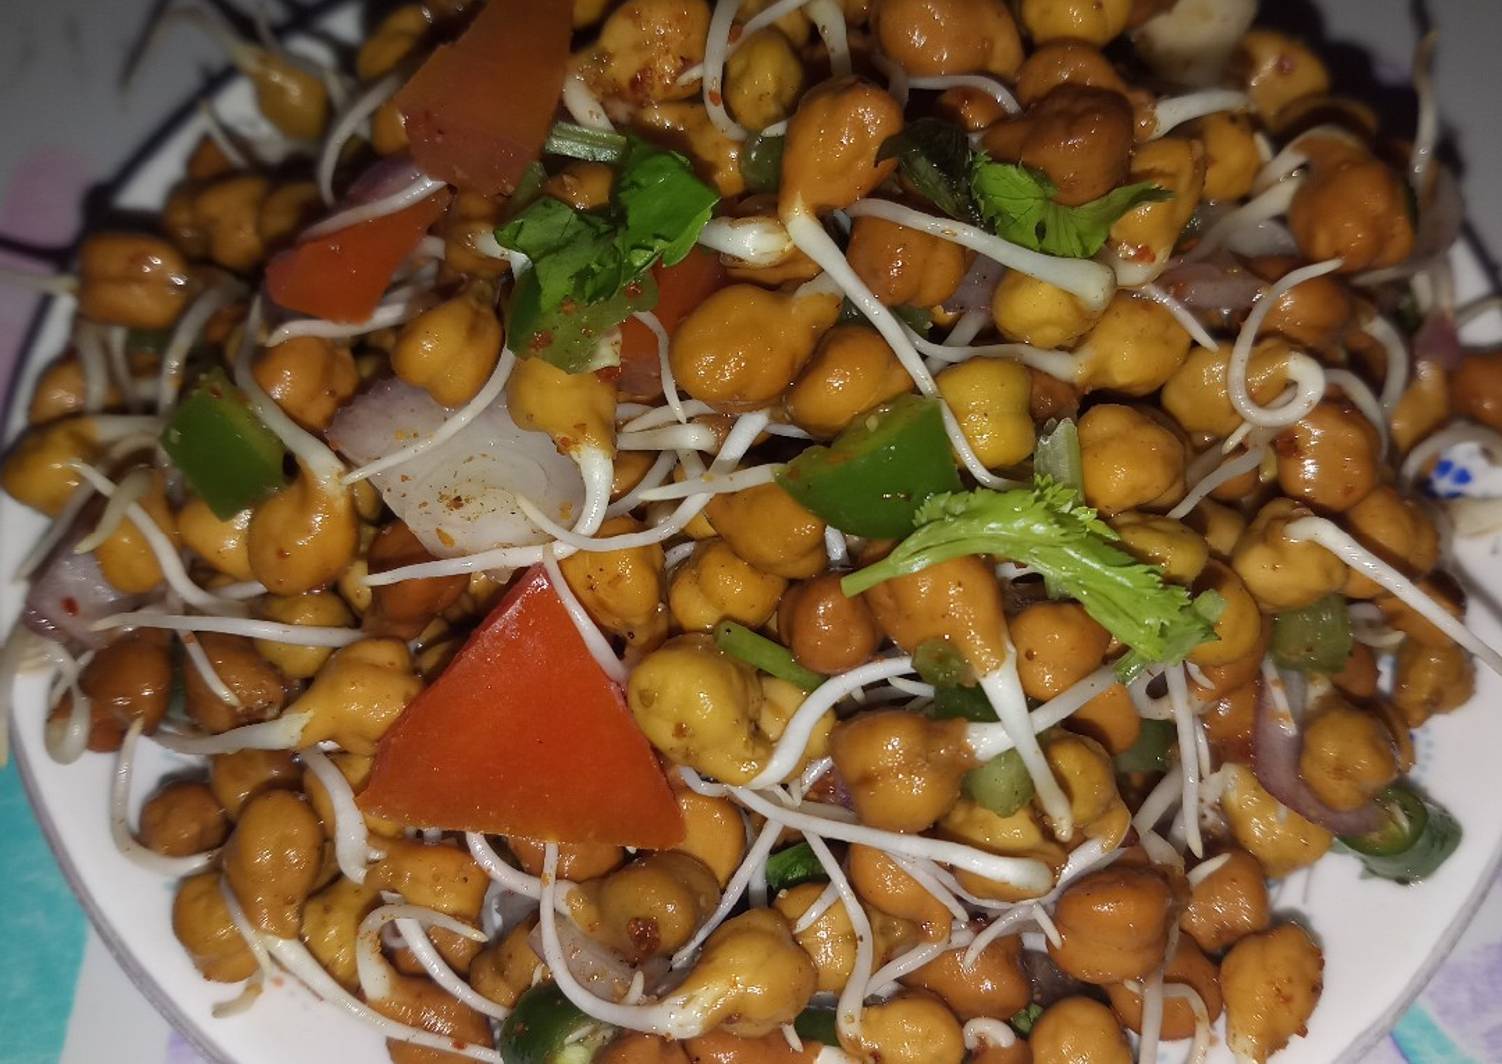 Sprouted chana Recipe by Neelima Chaudhary - Cookpad